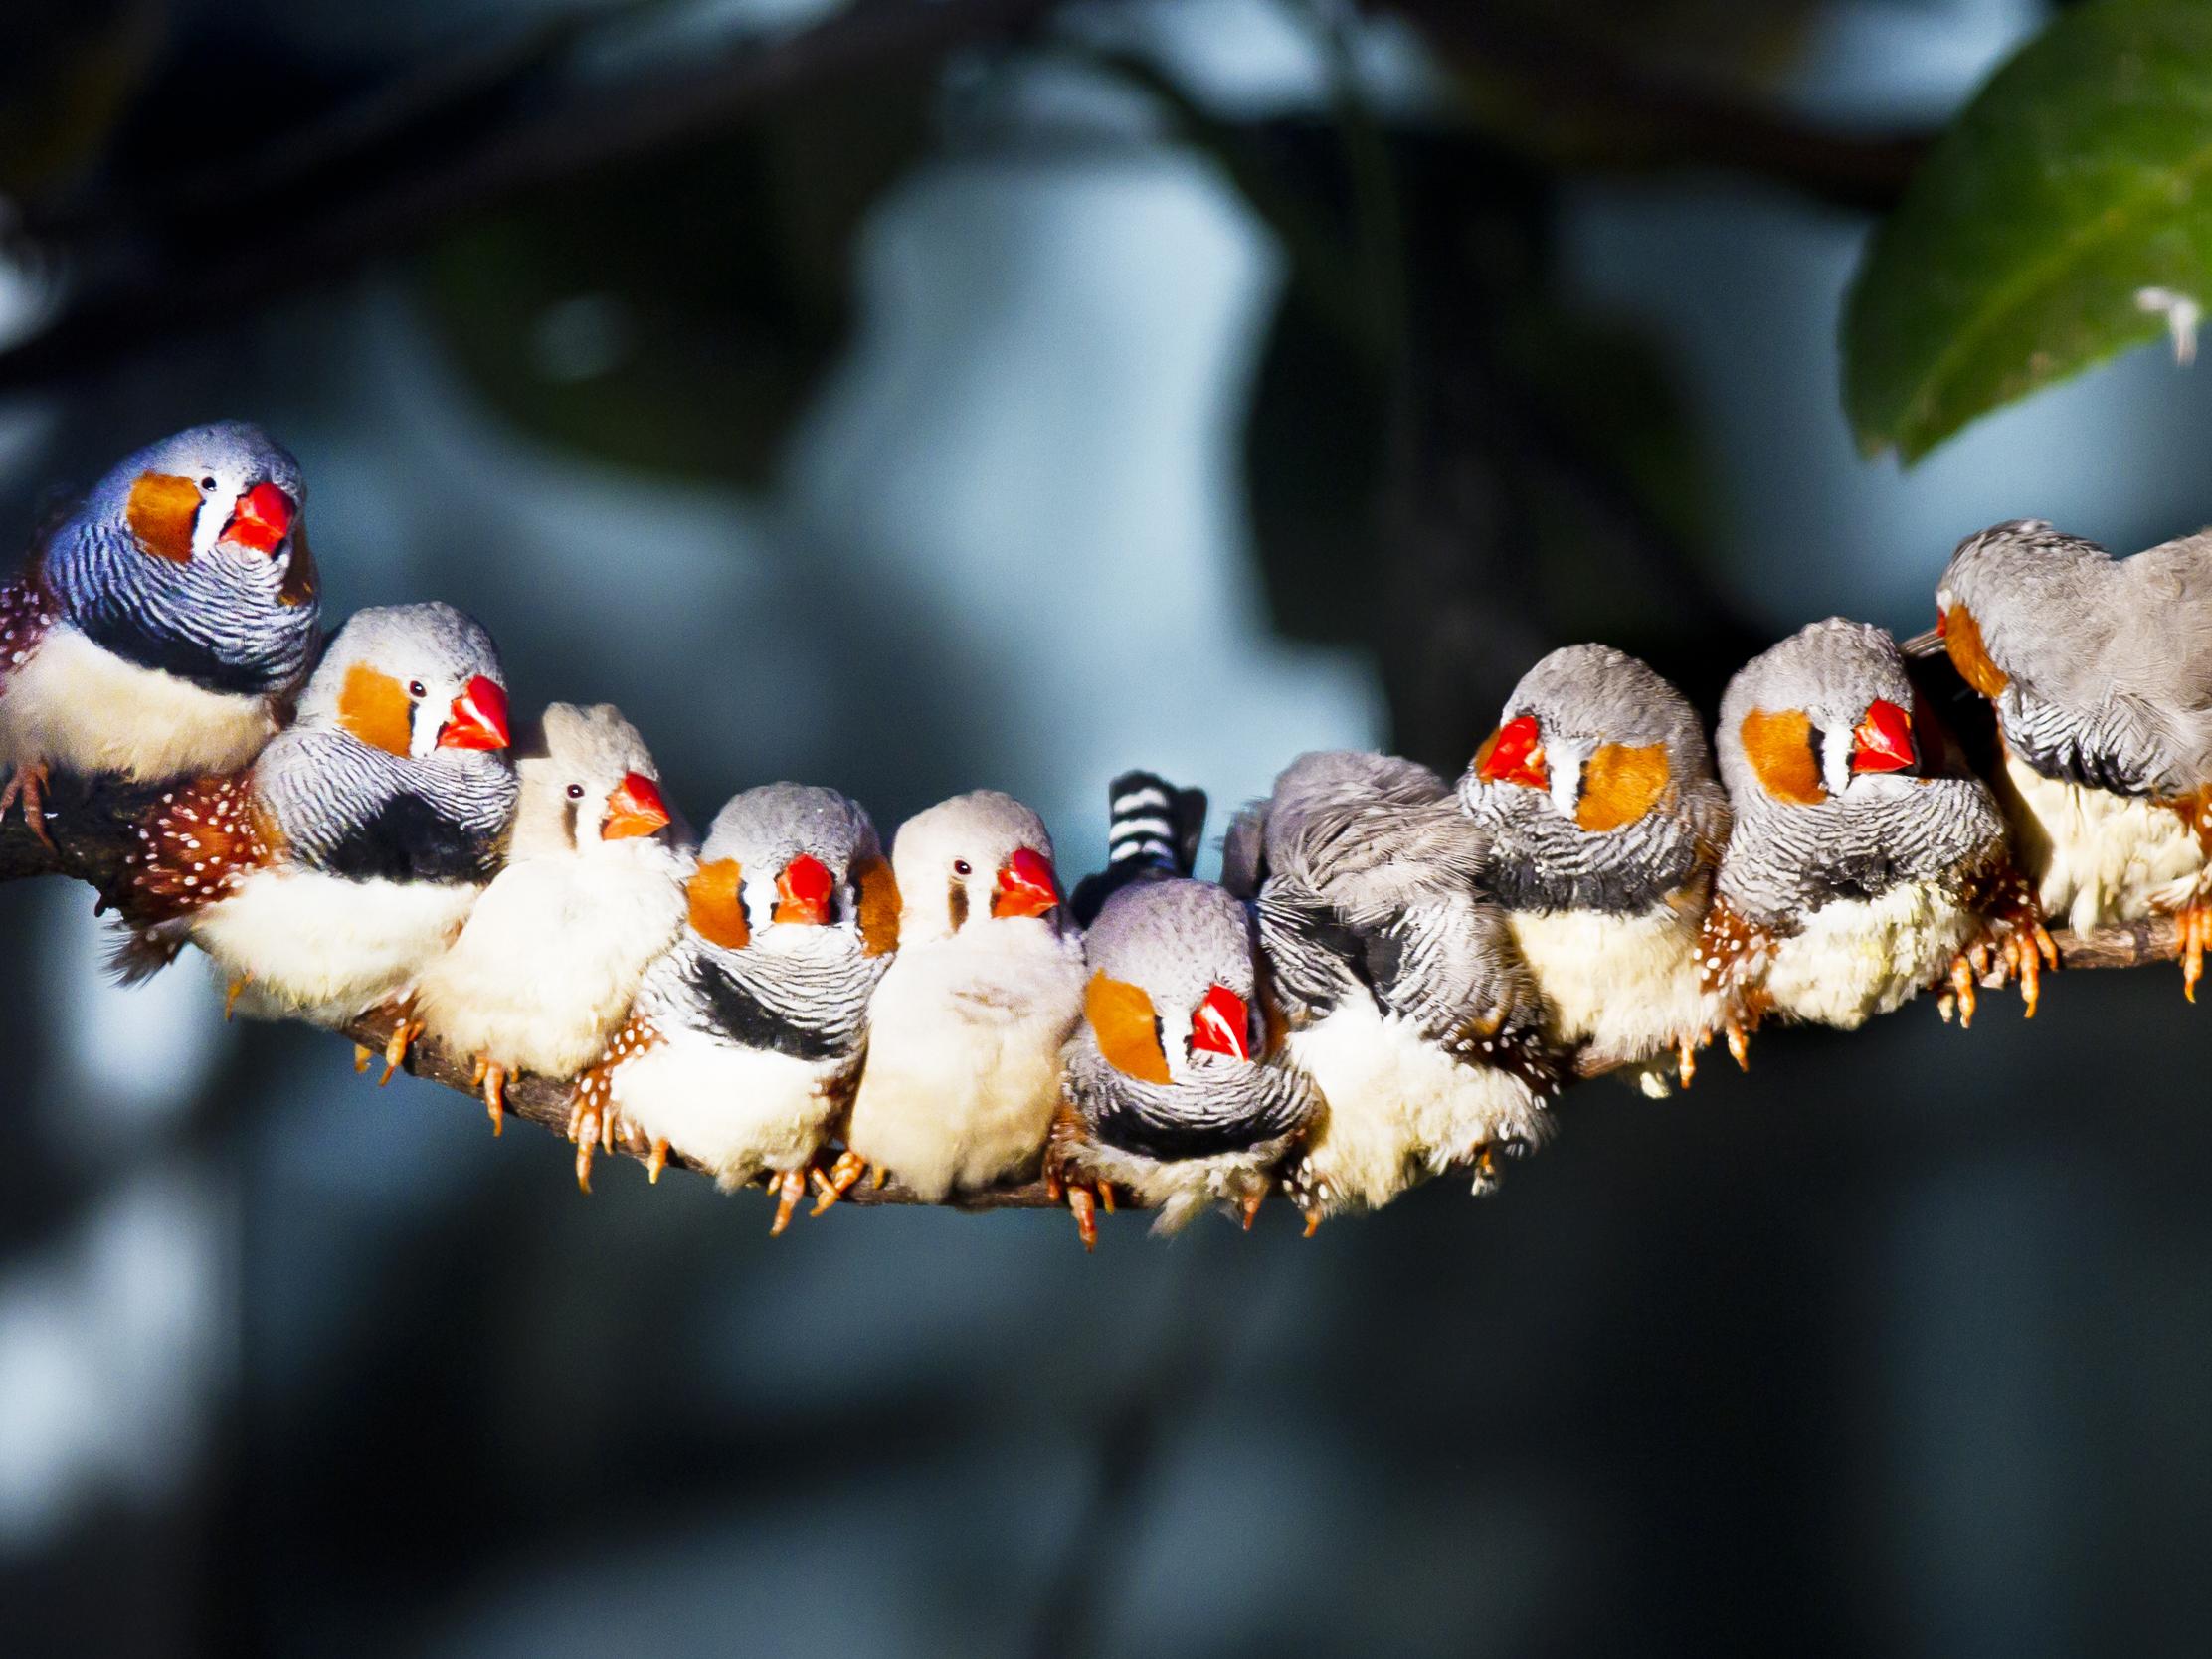 One of the research teams investigating the mysterious power of 'magnetoreception' studied zebra finches, and looked at changes in levels of various proteins in their bodies